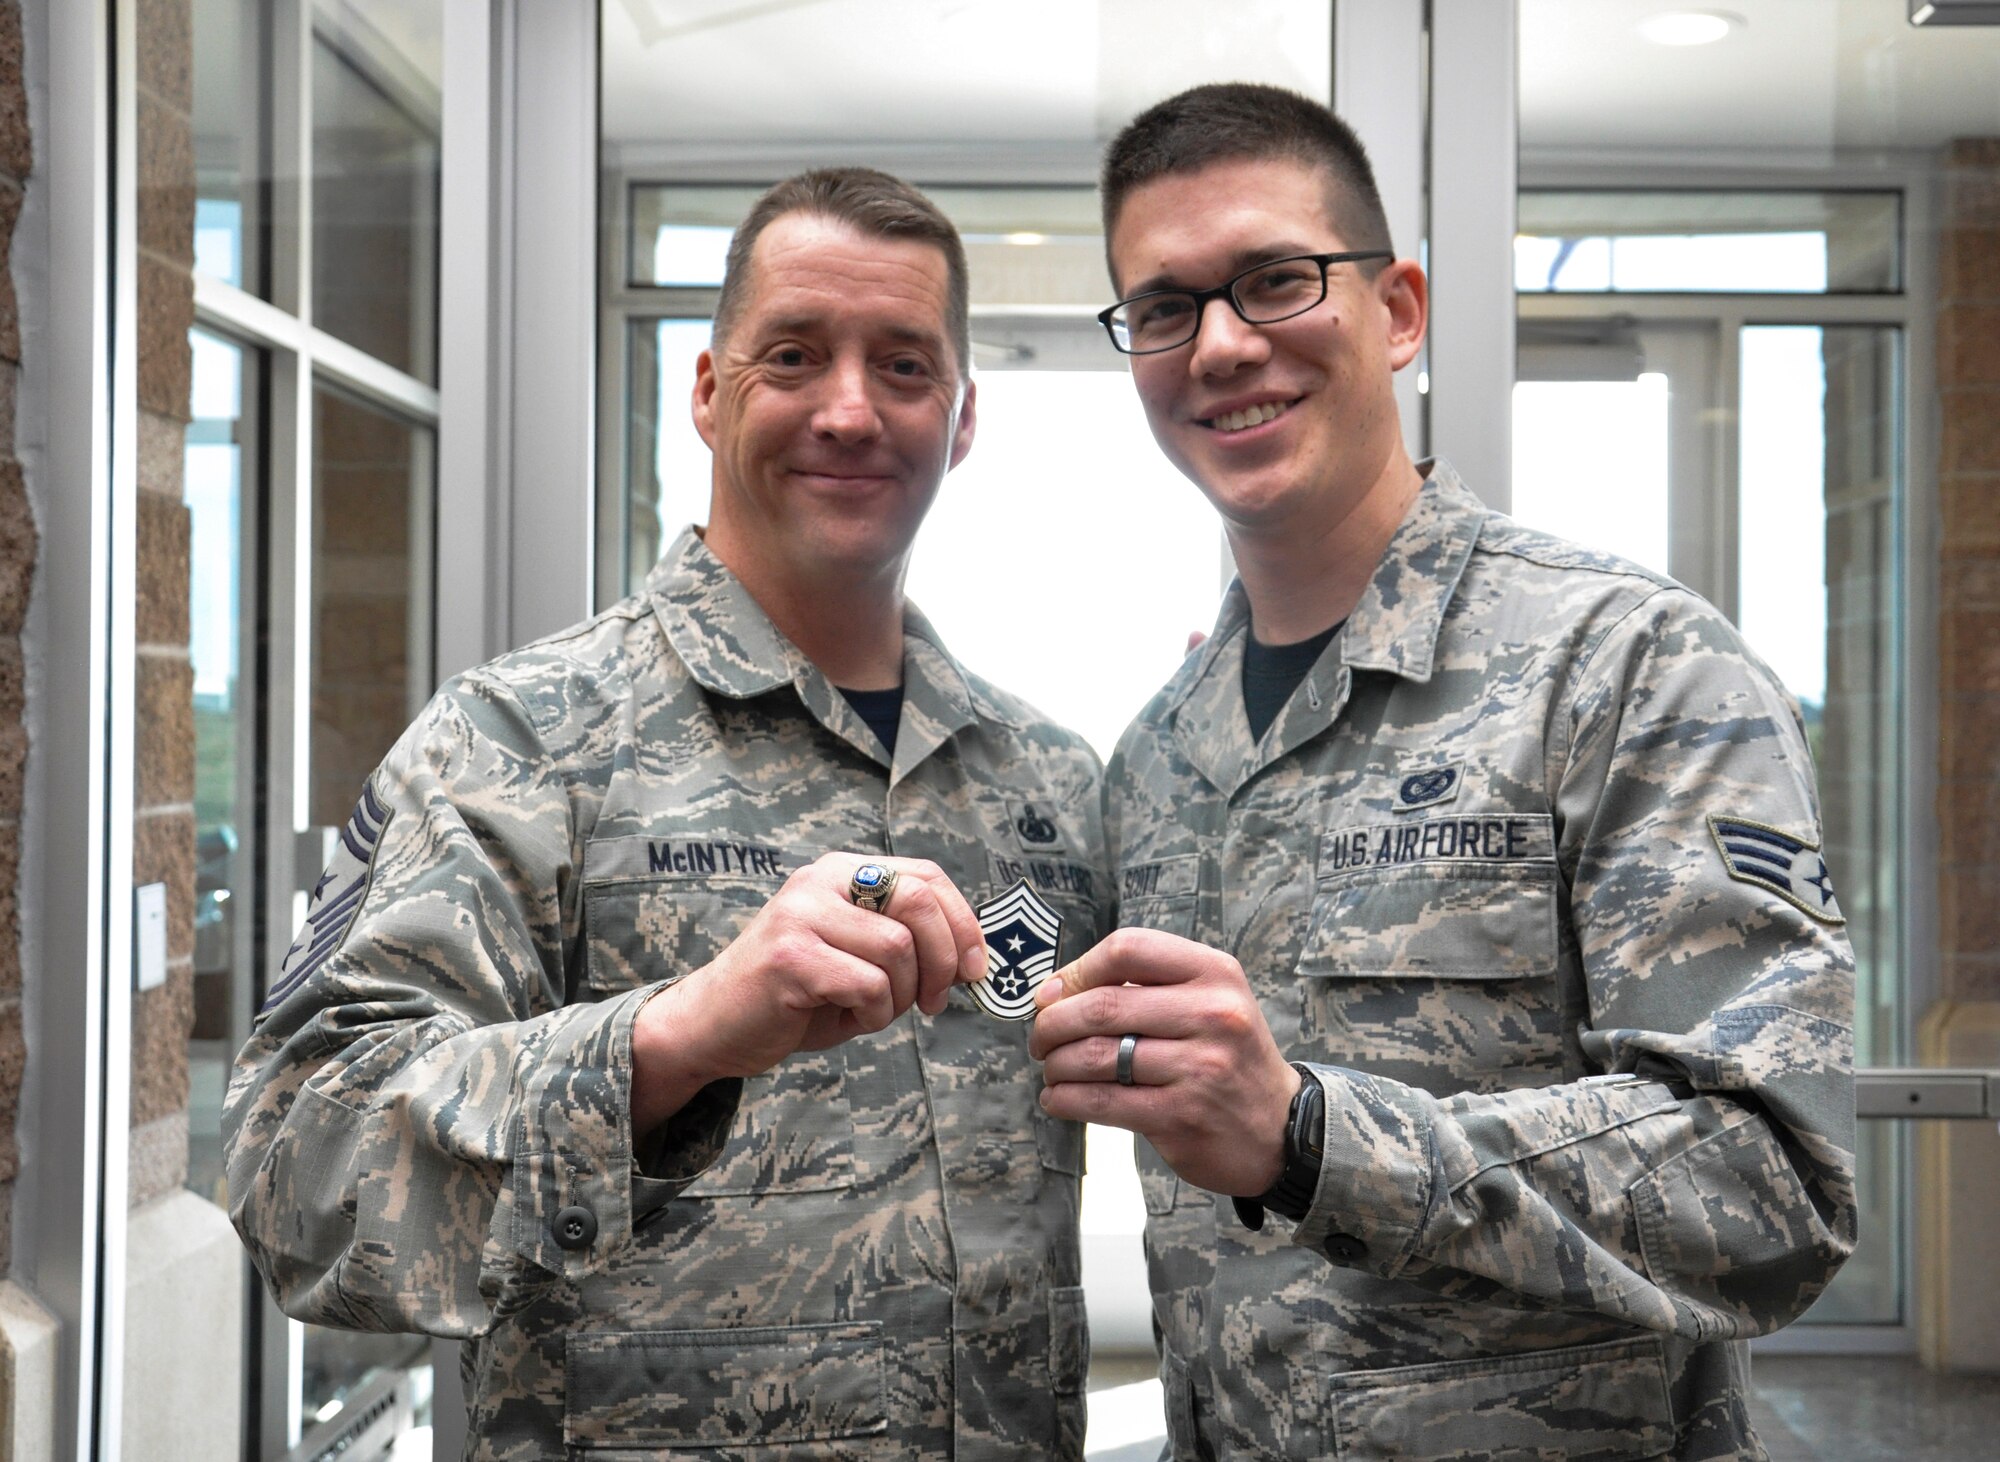 Chief Master Sgt. Douglas McIntyre, Air Force Space Command command chief, coins Senior Airman Darren Scott, 460th Space Wing Public Affairs, during his base visit April 9, 2015, on Buckley Air Force Base, Colo. During his visit, McIntyre spoke on Buckley AFB’s vast mission, its importance to national security, and the Airmen who accomplish the mission every day. (U.S. Air Force photo by Tech. Sgt. Nicholas Rau/Released)